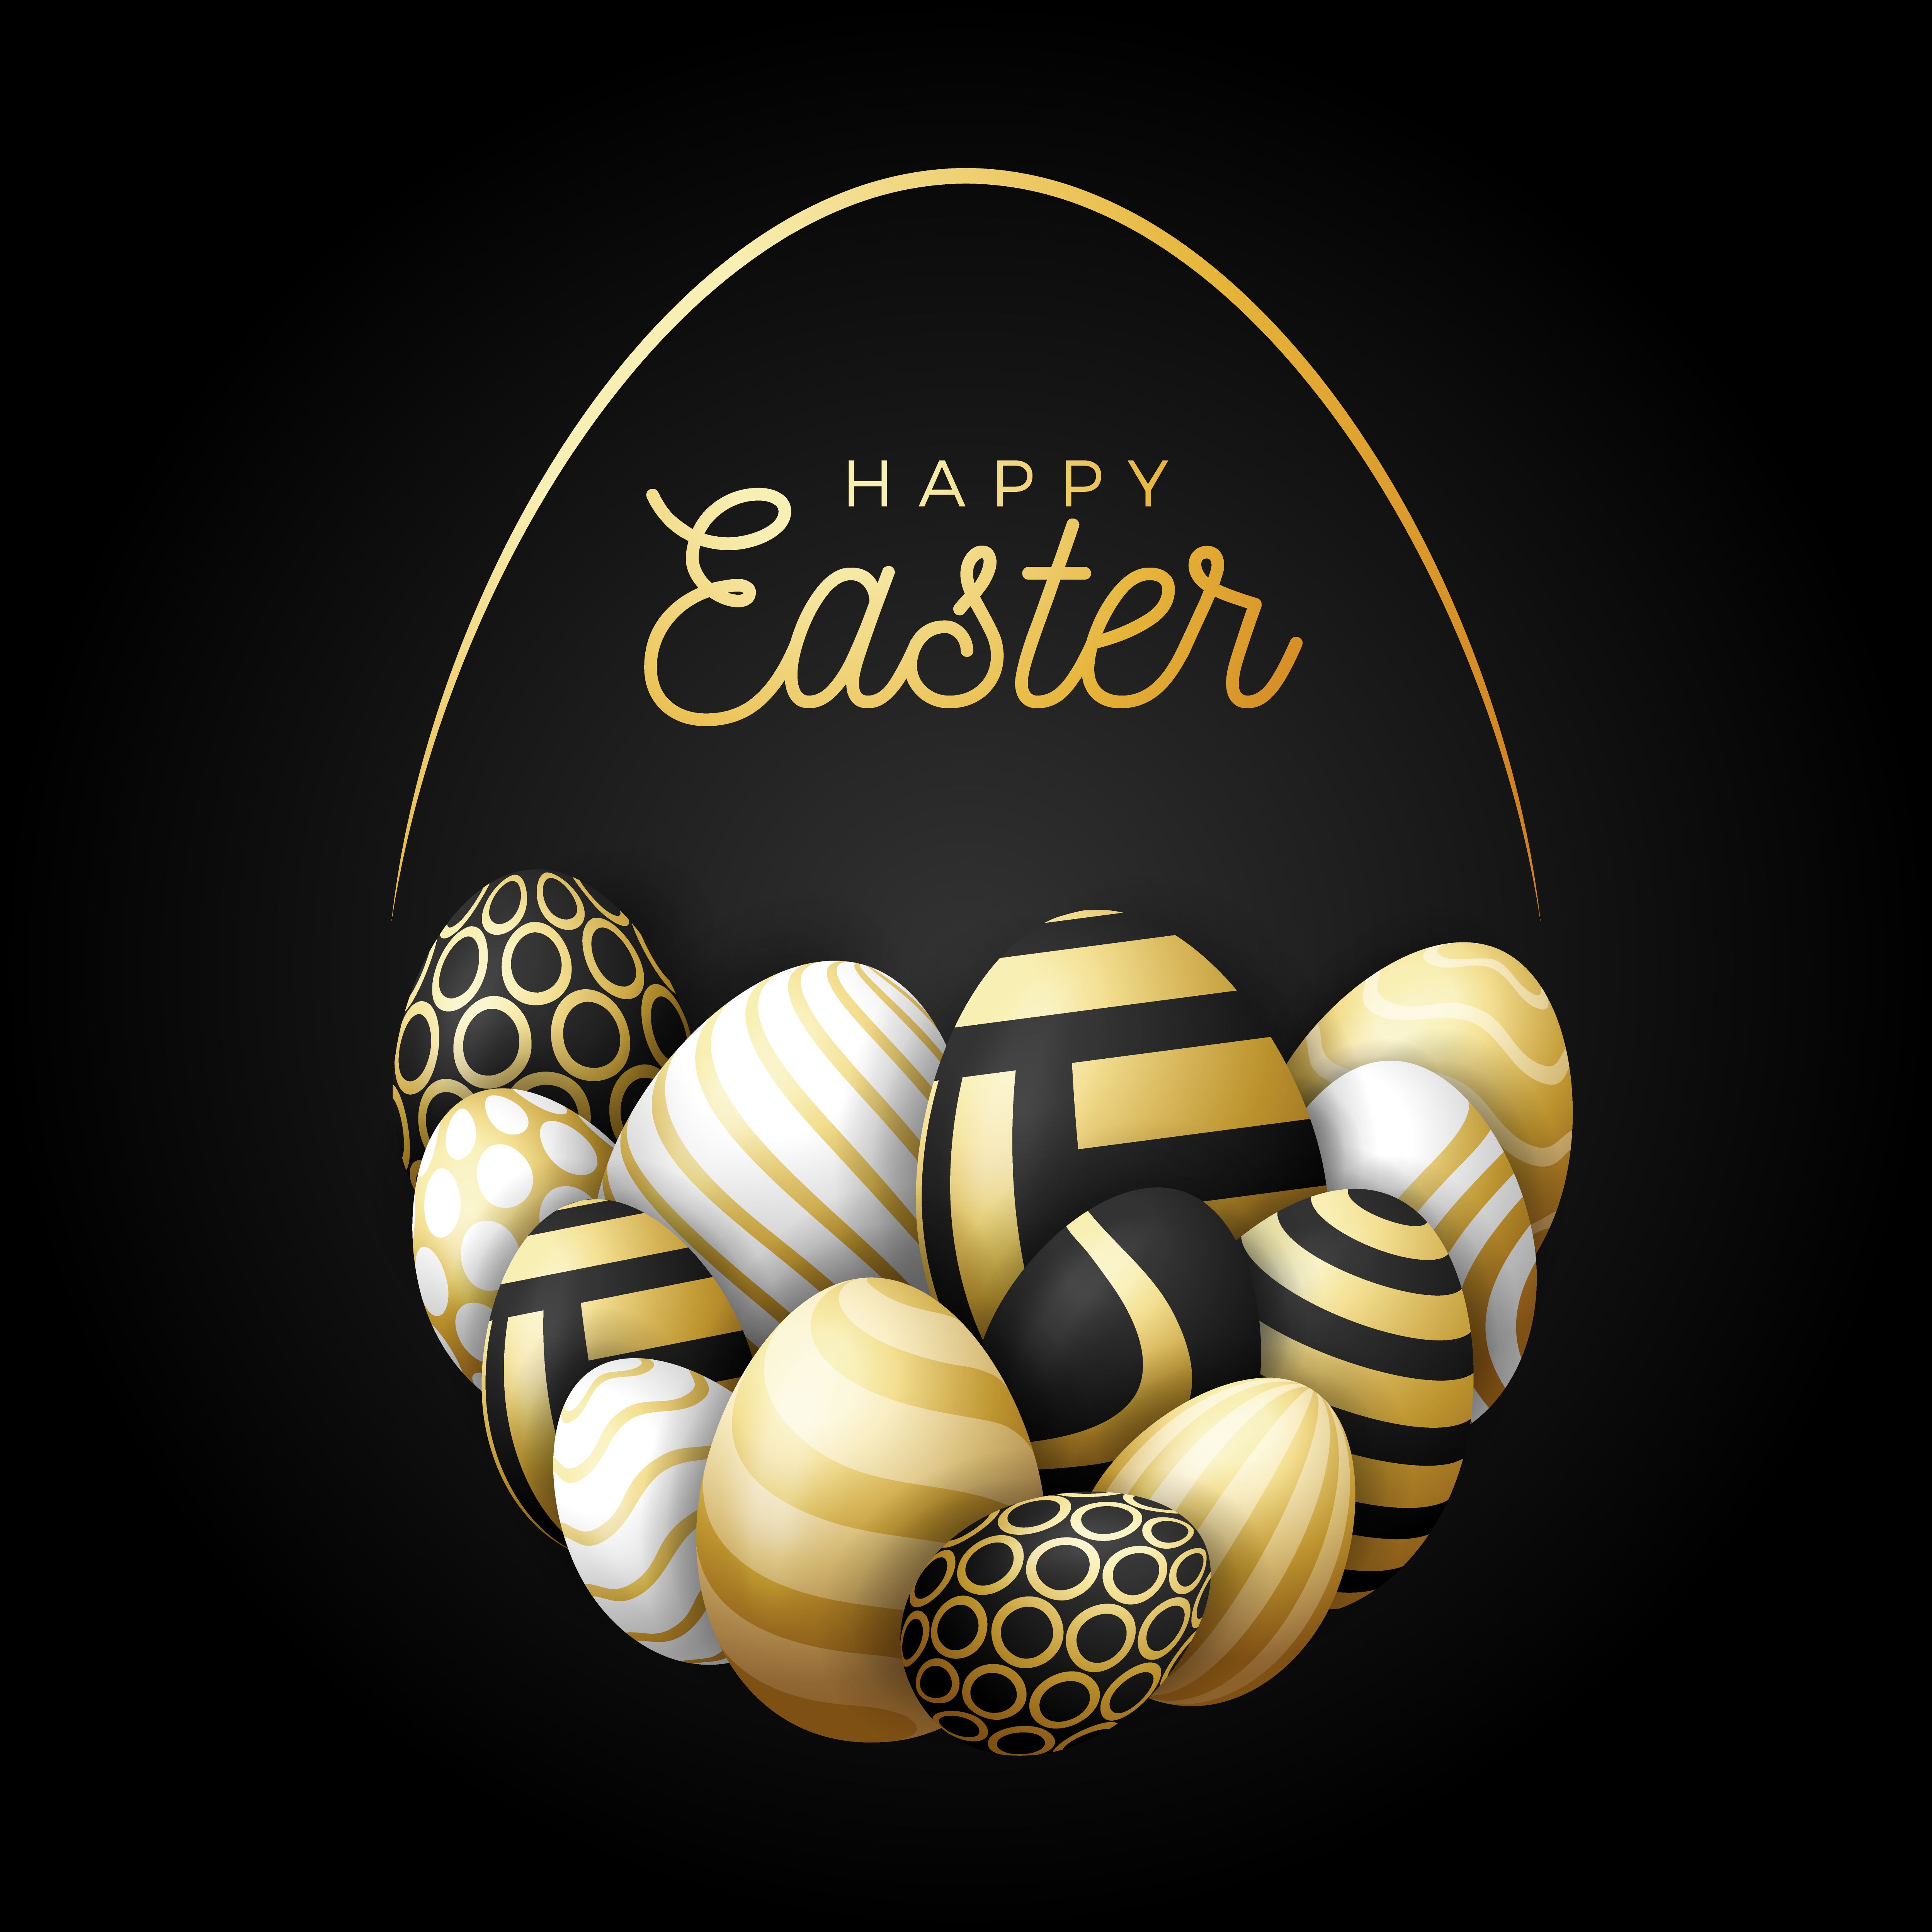 Luxury Happy Easter Card With Eggs. Many Beautiful Golden Realistic Eggs Are Laid Out in the Shape of a Large Egg. Vector Illustration for Easter on Black Background. 1819081 Vector Art at